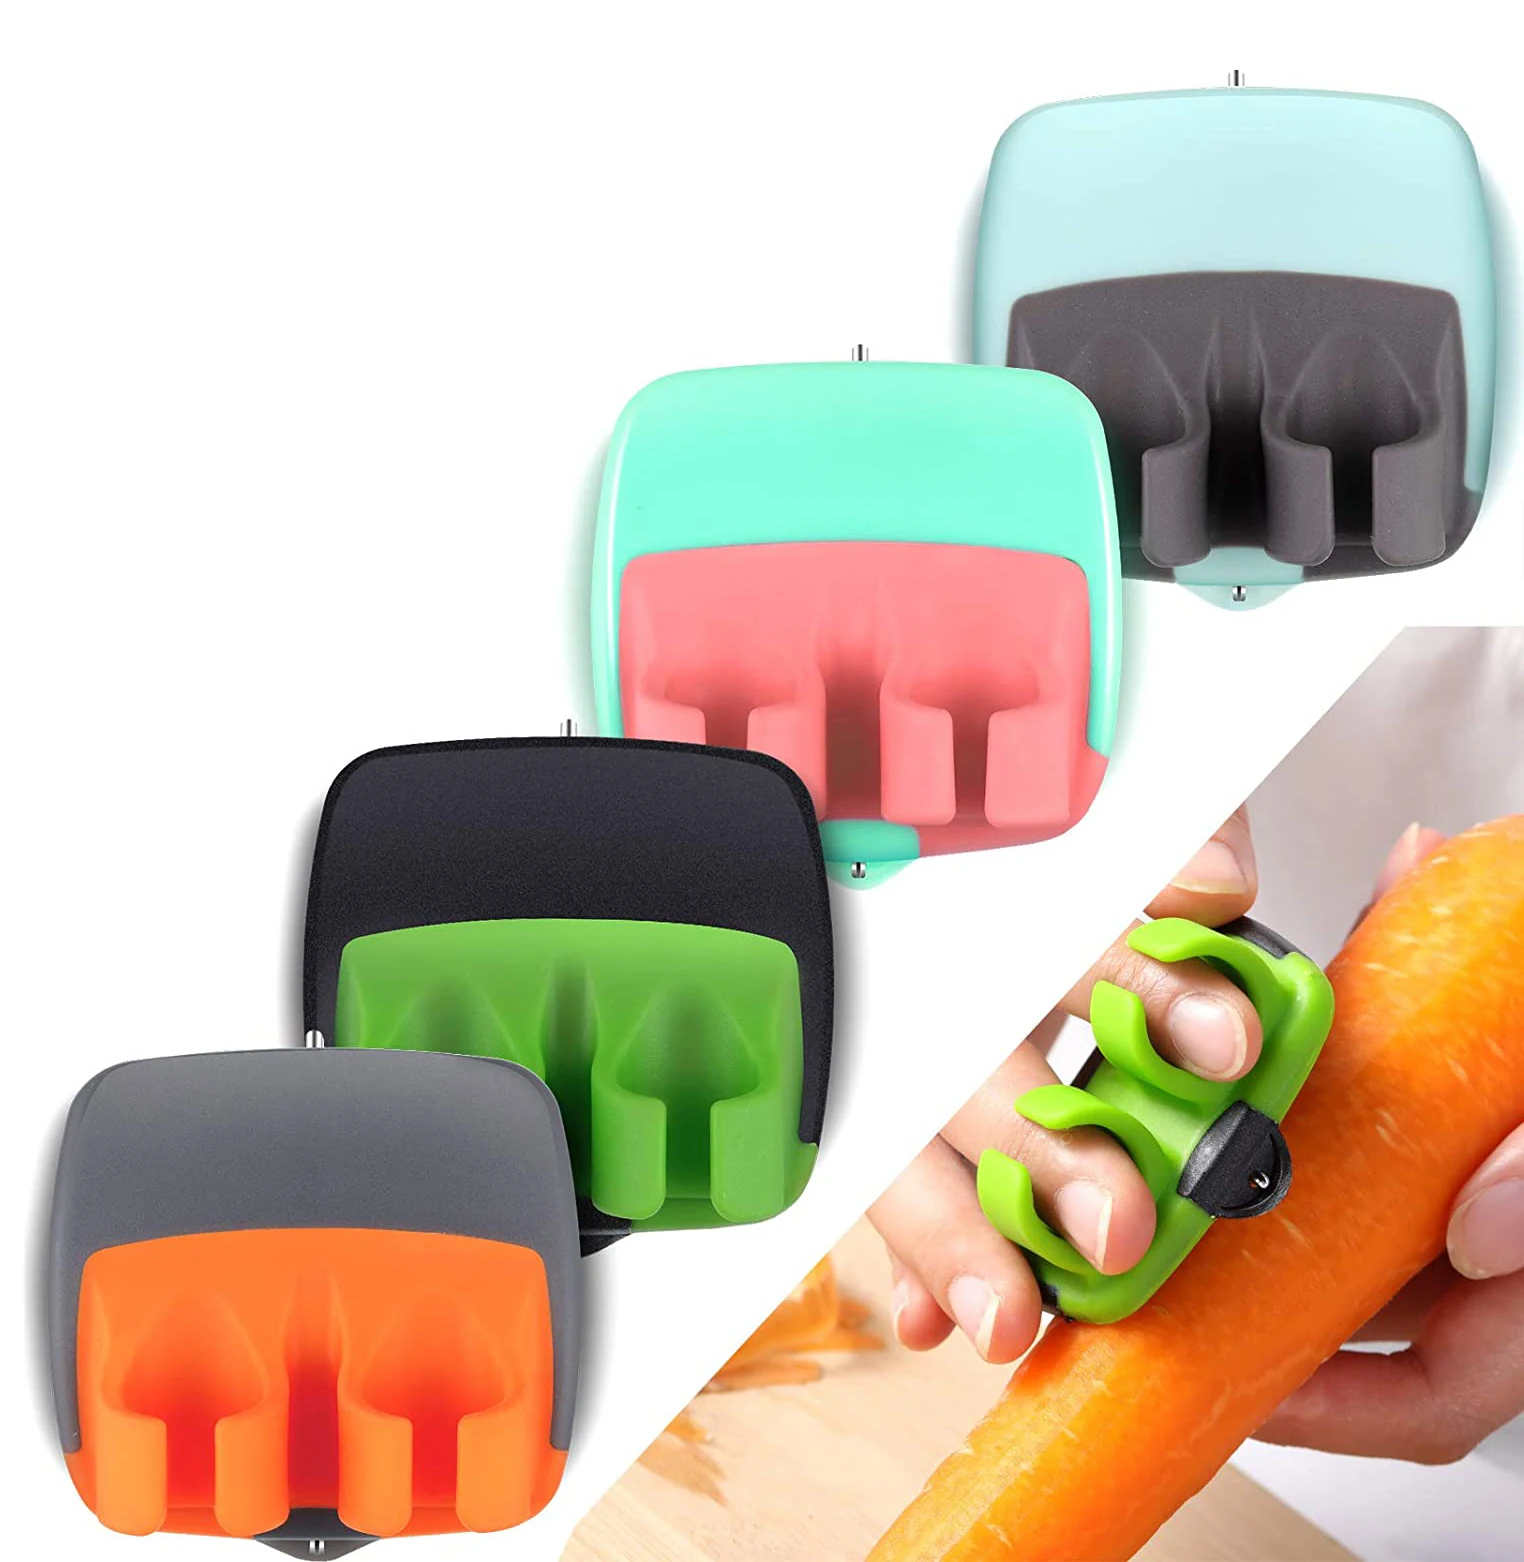 

For Potato Vegetable Plastic Stainless Steel Kitchen Gadget Accessories Palm Finger Apple Fruit Peeler, Available